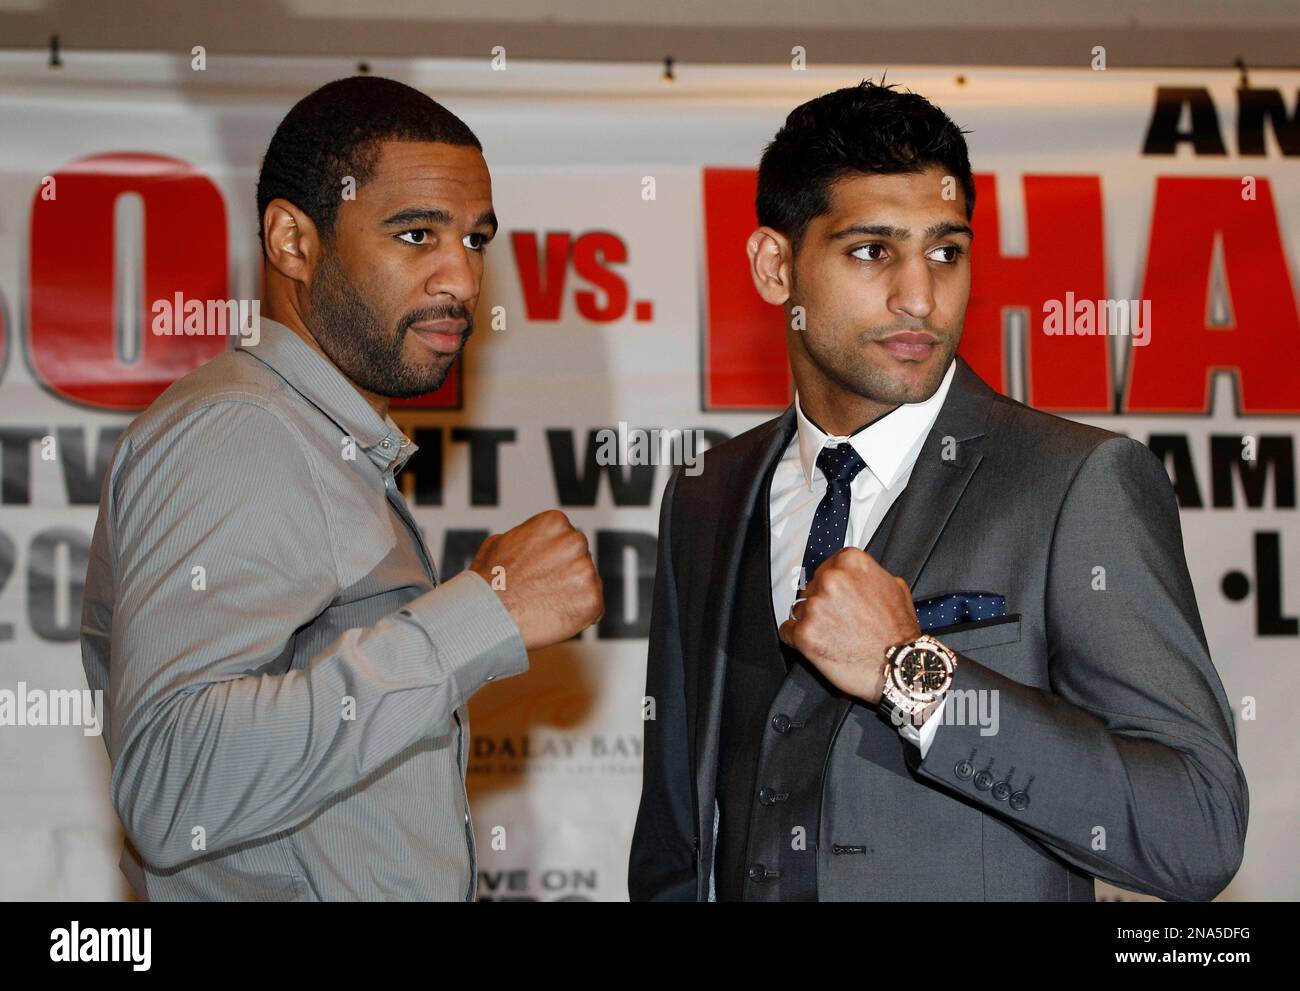 Light Welterweight World Champion US boxer Lamont Peterson, left, and British Boxer Amir Khan, pose for the photographers following a news conference in London, Tuesday, March 13, 2012